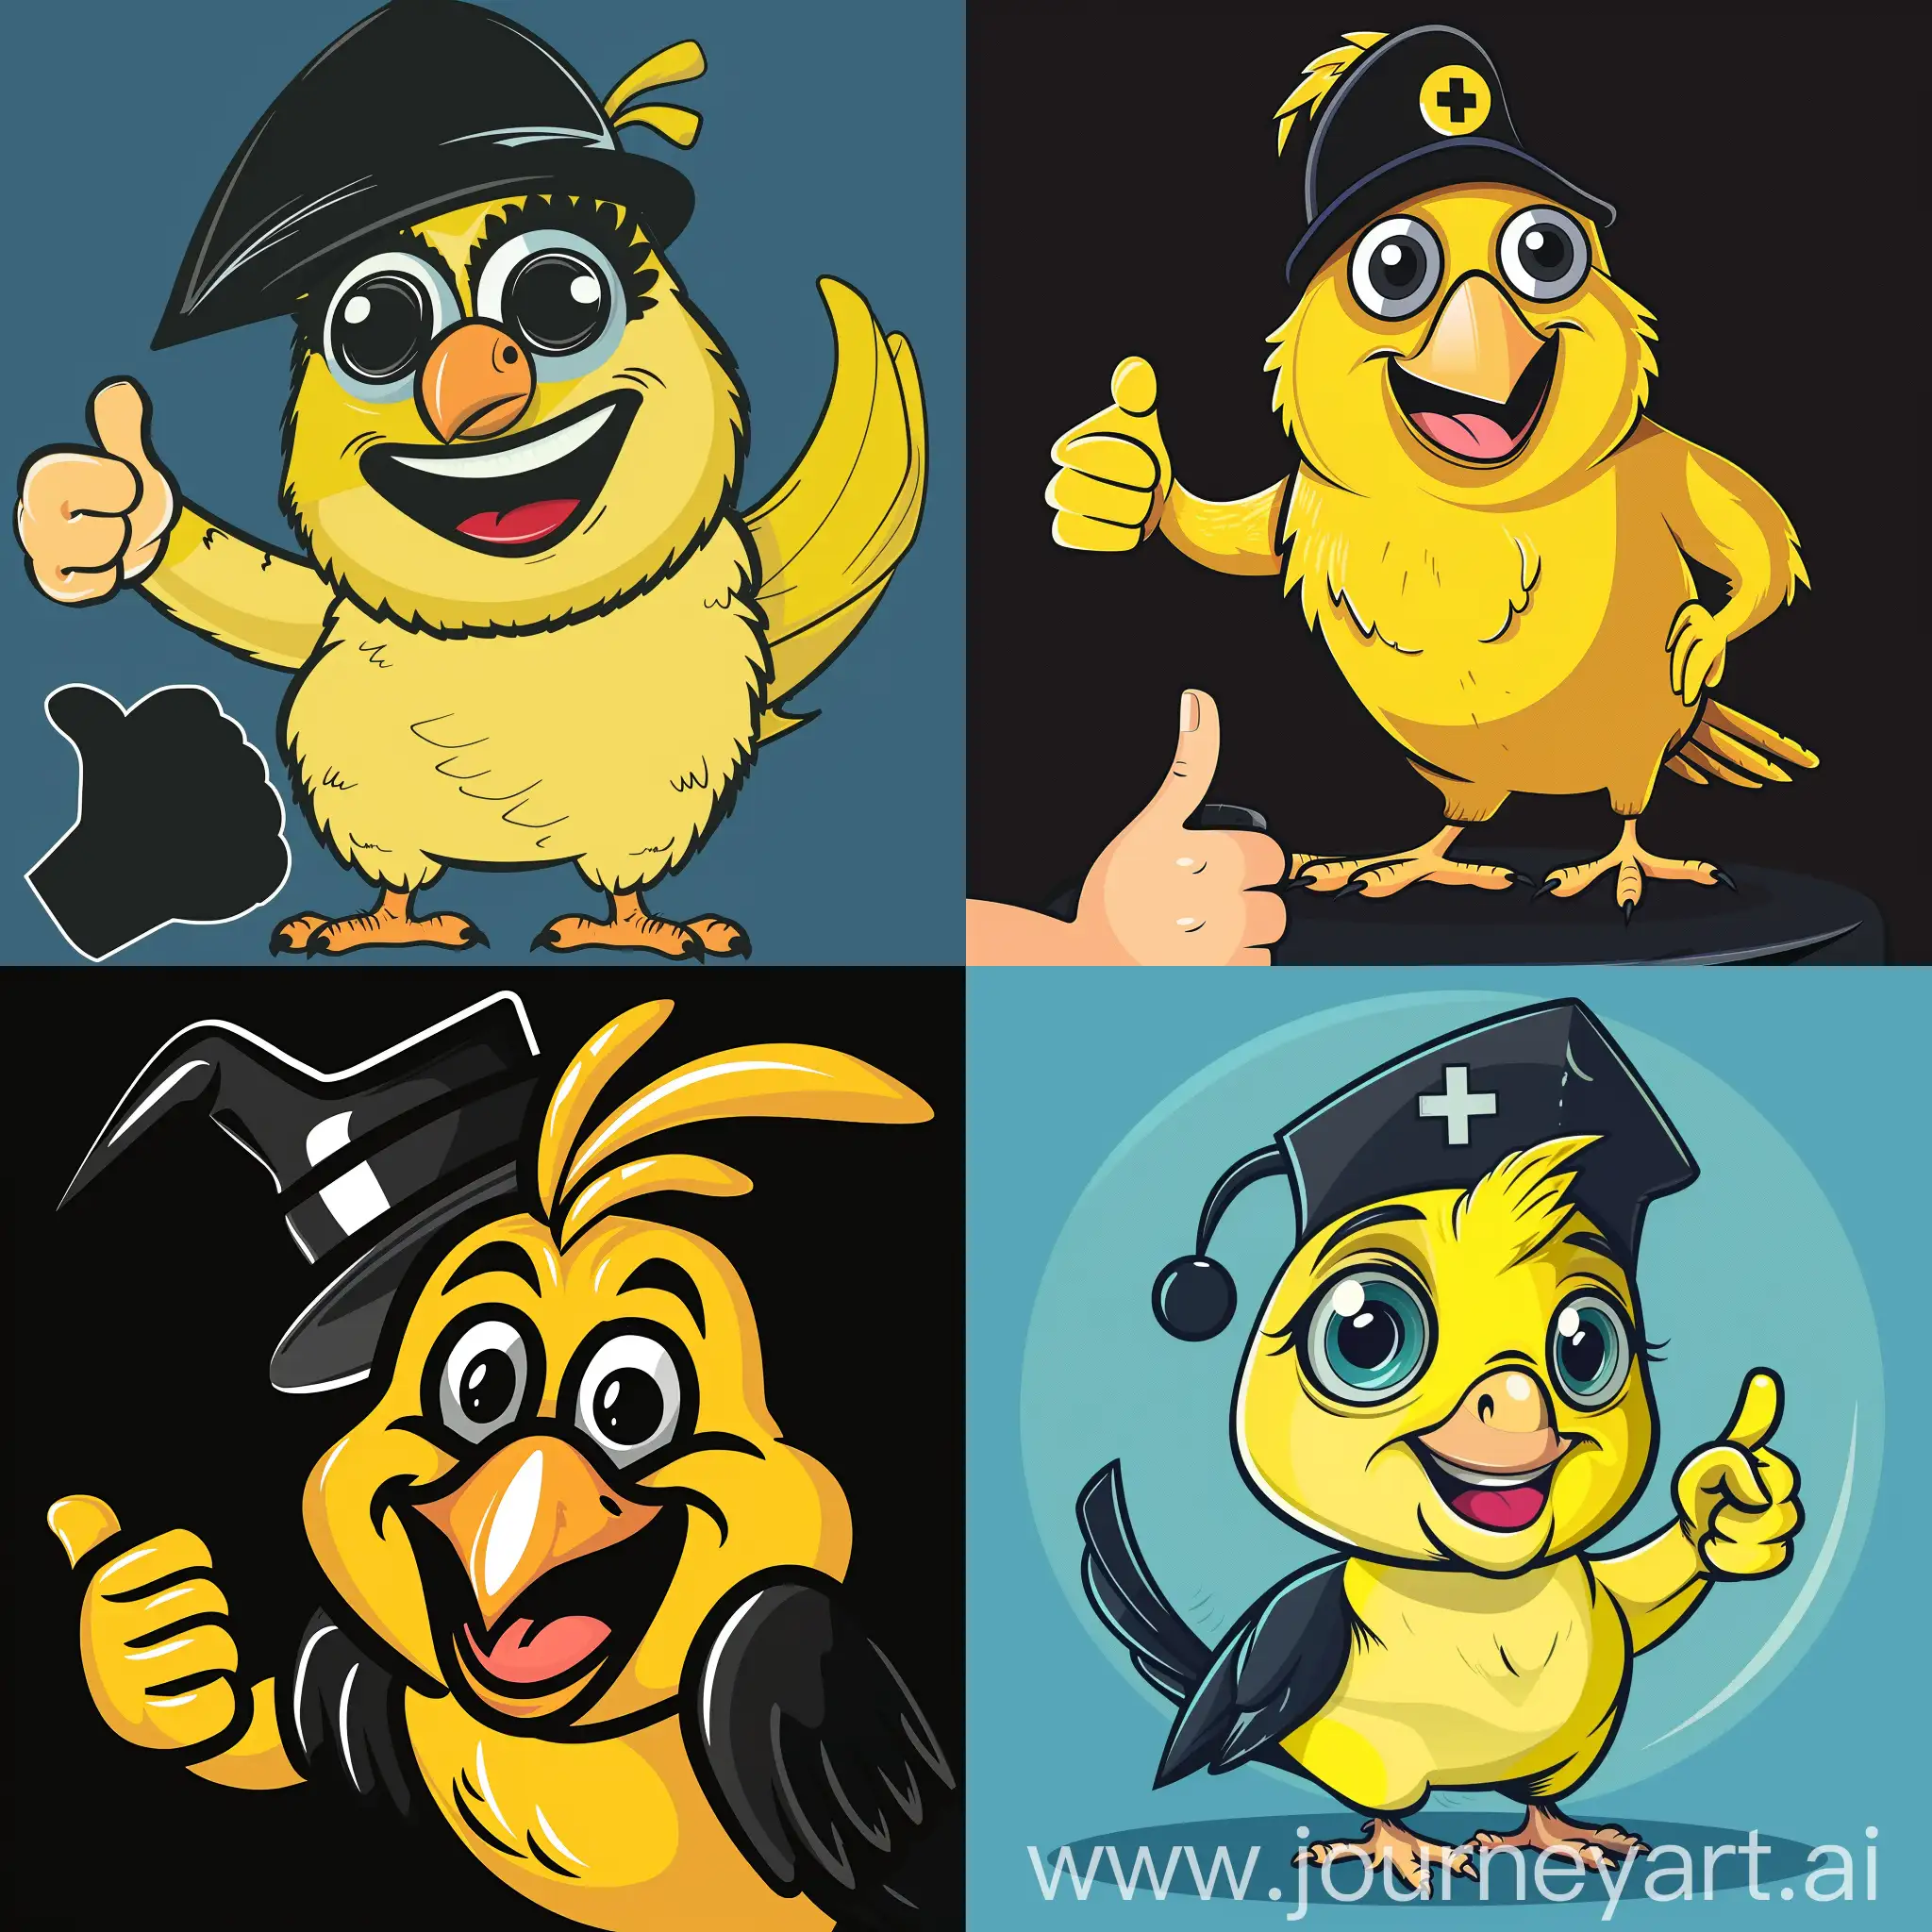 Cheerful-Cartoon-Yellow-Cockatiel-with-Doctoral-Hat-and-Glasses-Giving-Thumbs-Up